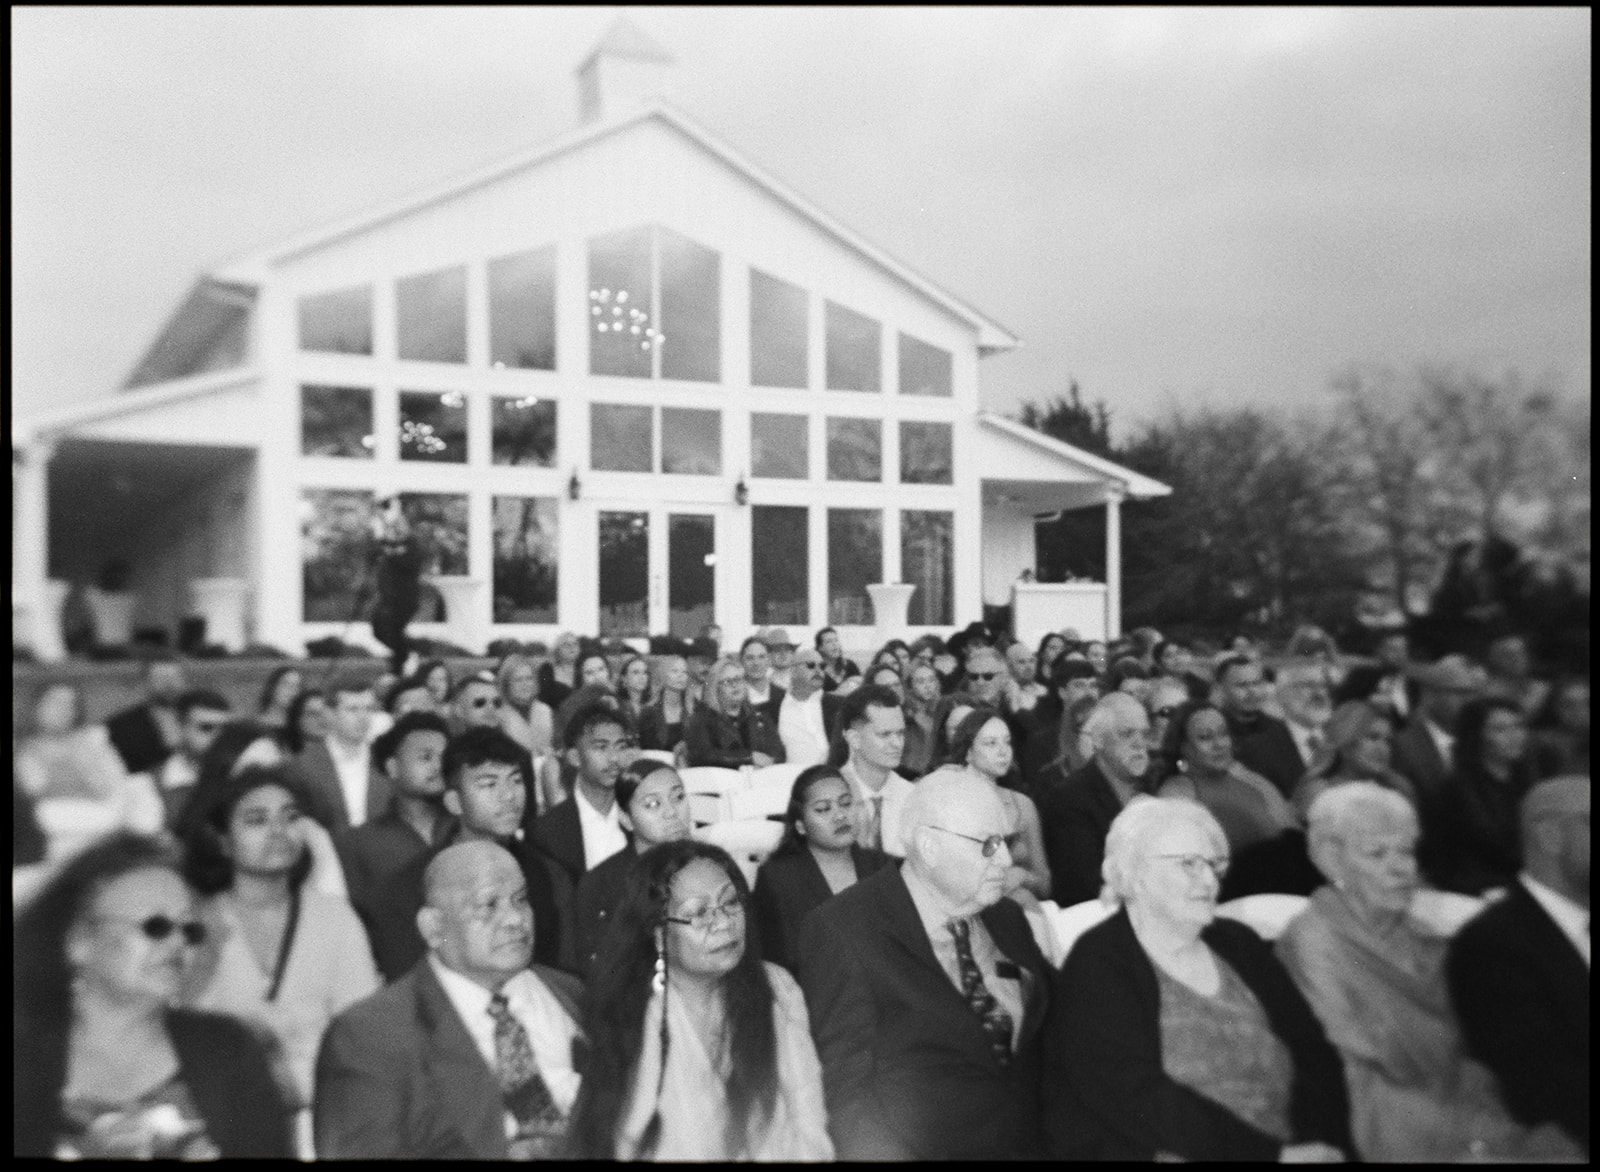 a medium format Holga film photo of the guests with the glass wedding venue in the background